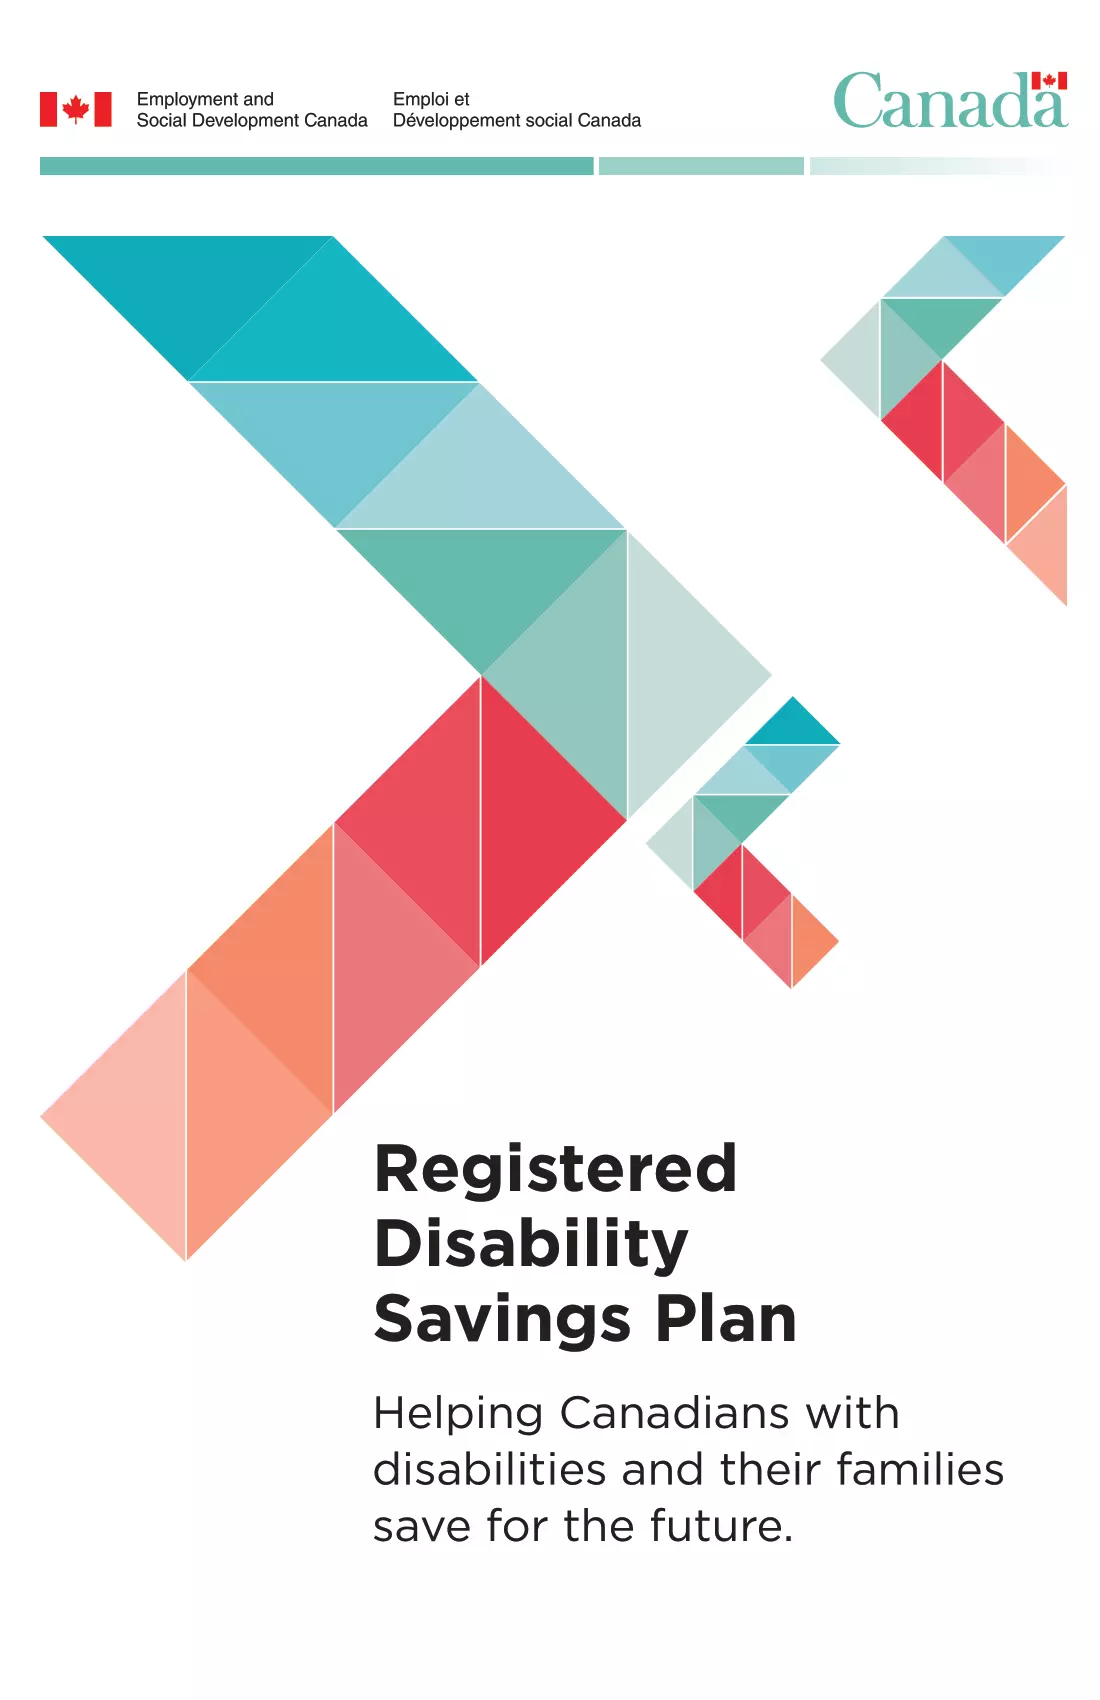 A Complete Guide to Registered Disability Savings Plans (RDSPs)